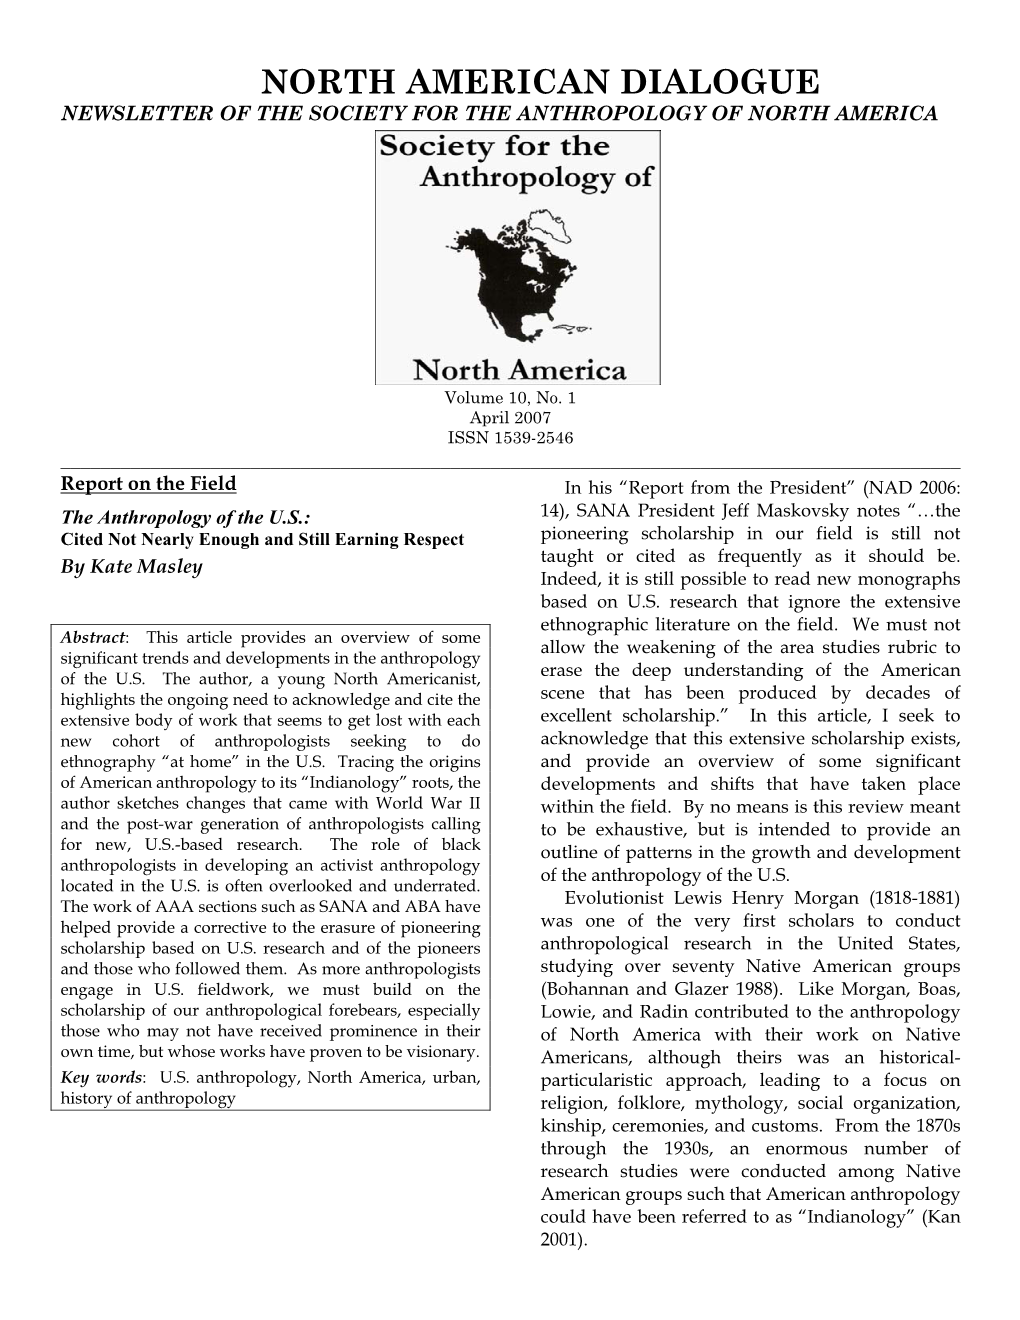 North American Dialogue Newsletter of the Society for the Anthropology of North America